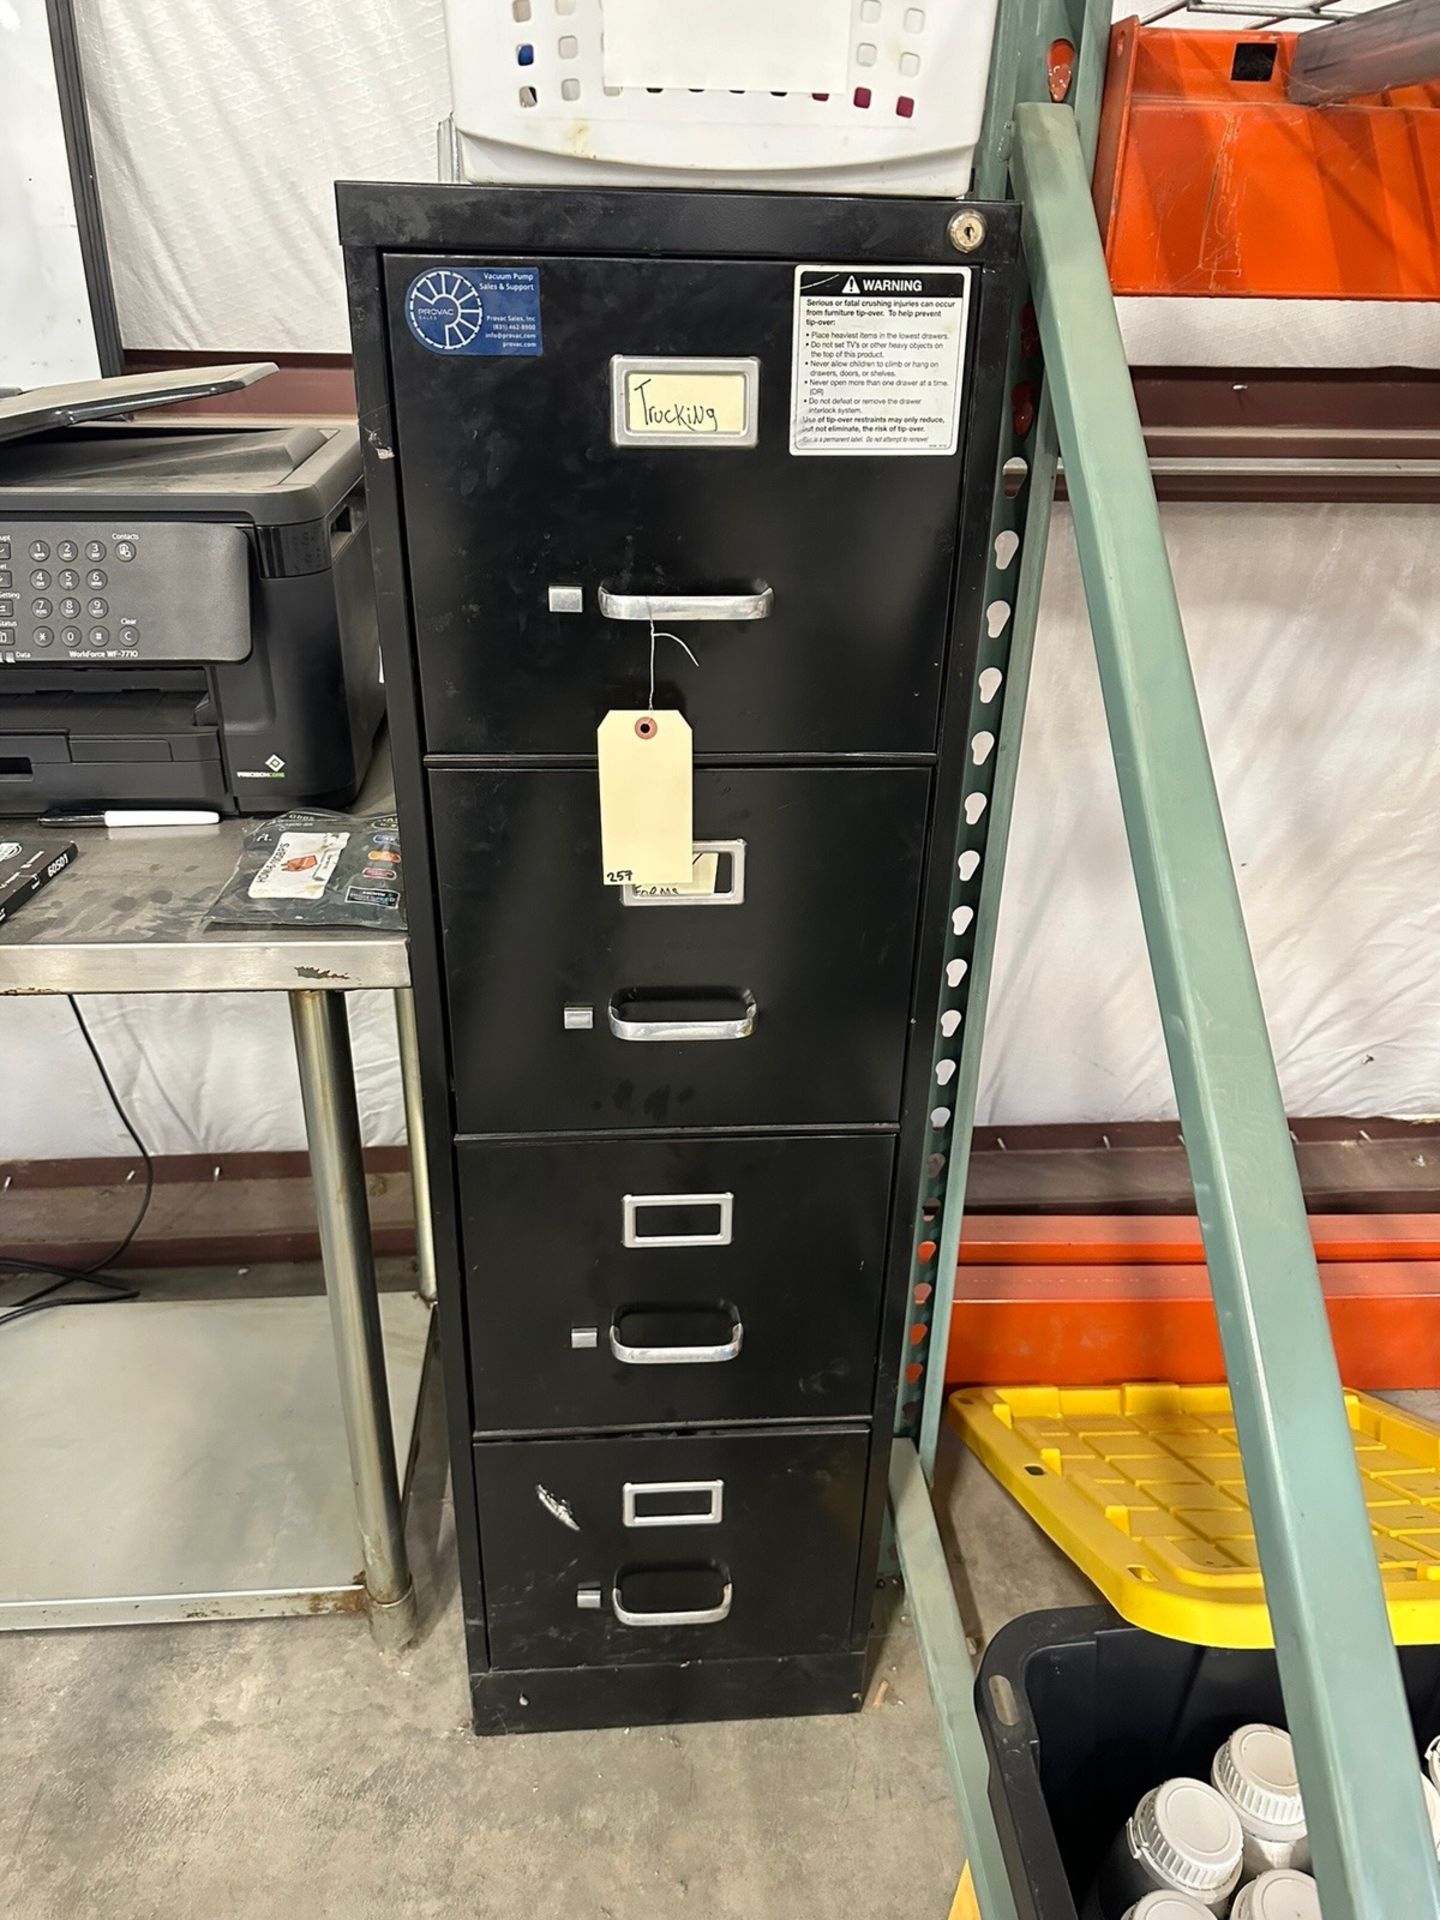 Work Station, Stainless Steel Tables, Printer Monitor, File Cabinet | Rig Fee $125 - Image 6 of 6